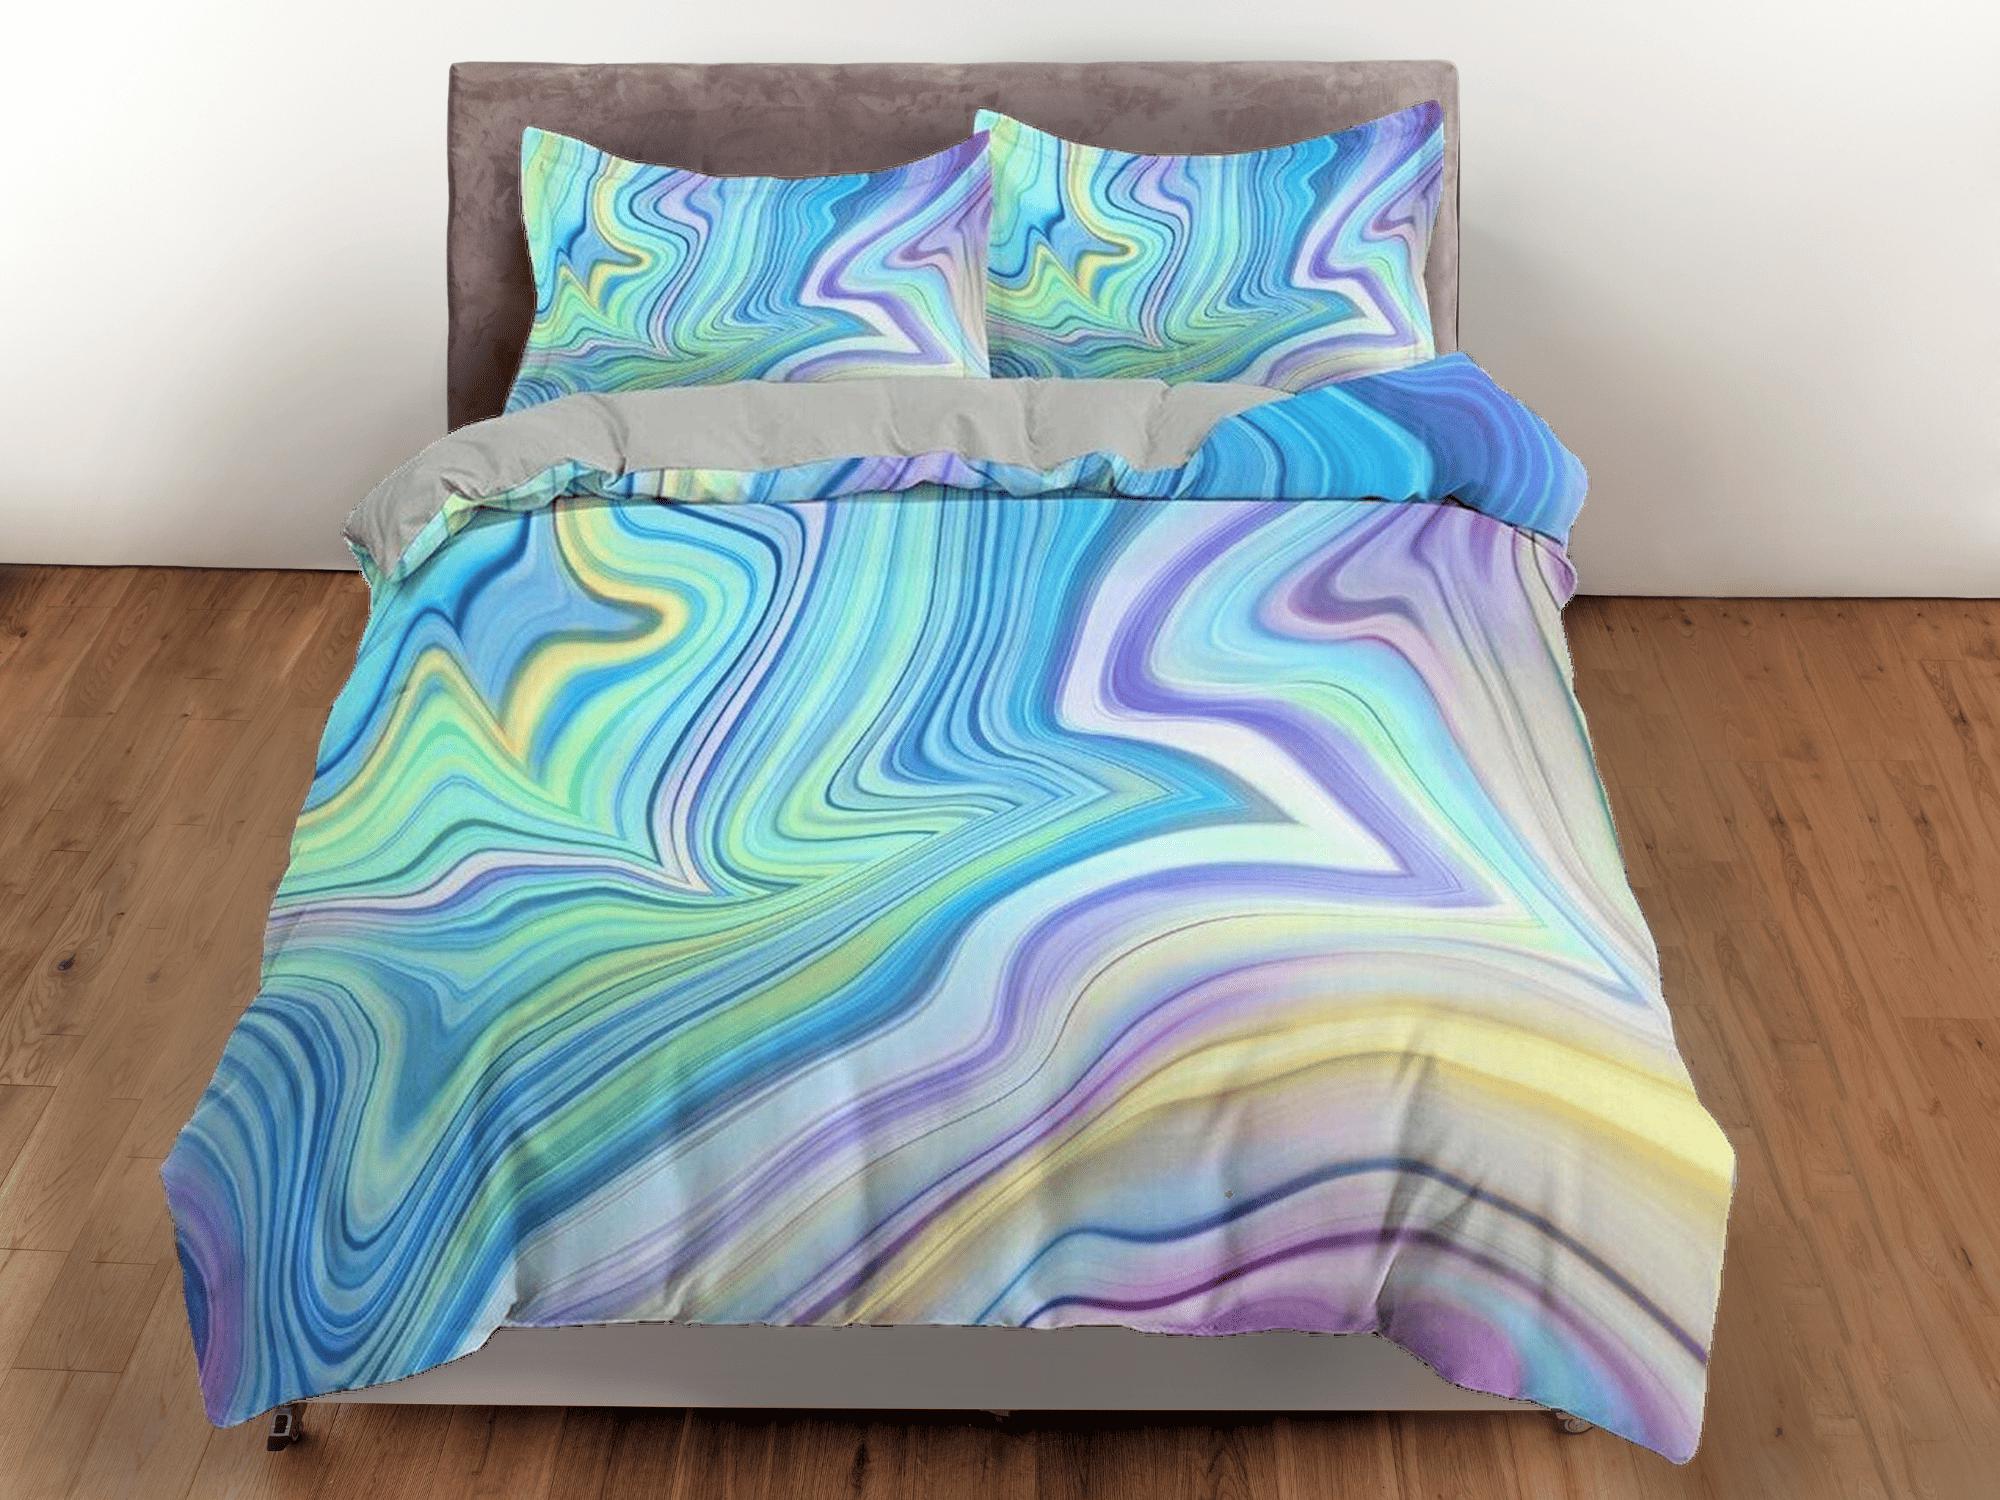 daintyduvet Cyan blue purple yellow contemporary bedroom set aesthetic duvet cover, marble abstract art room decor boho chic bedding set full king queen